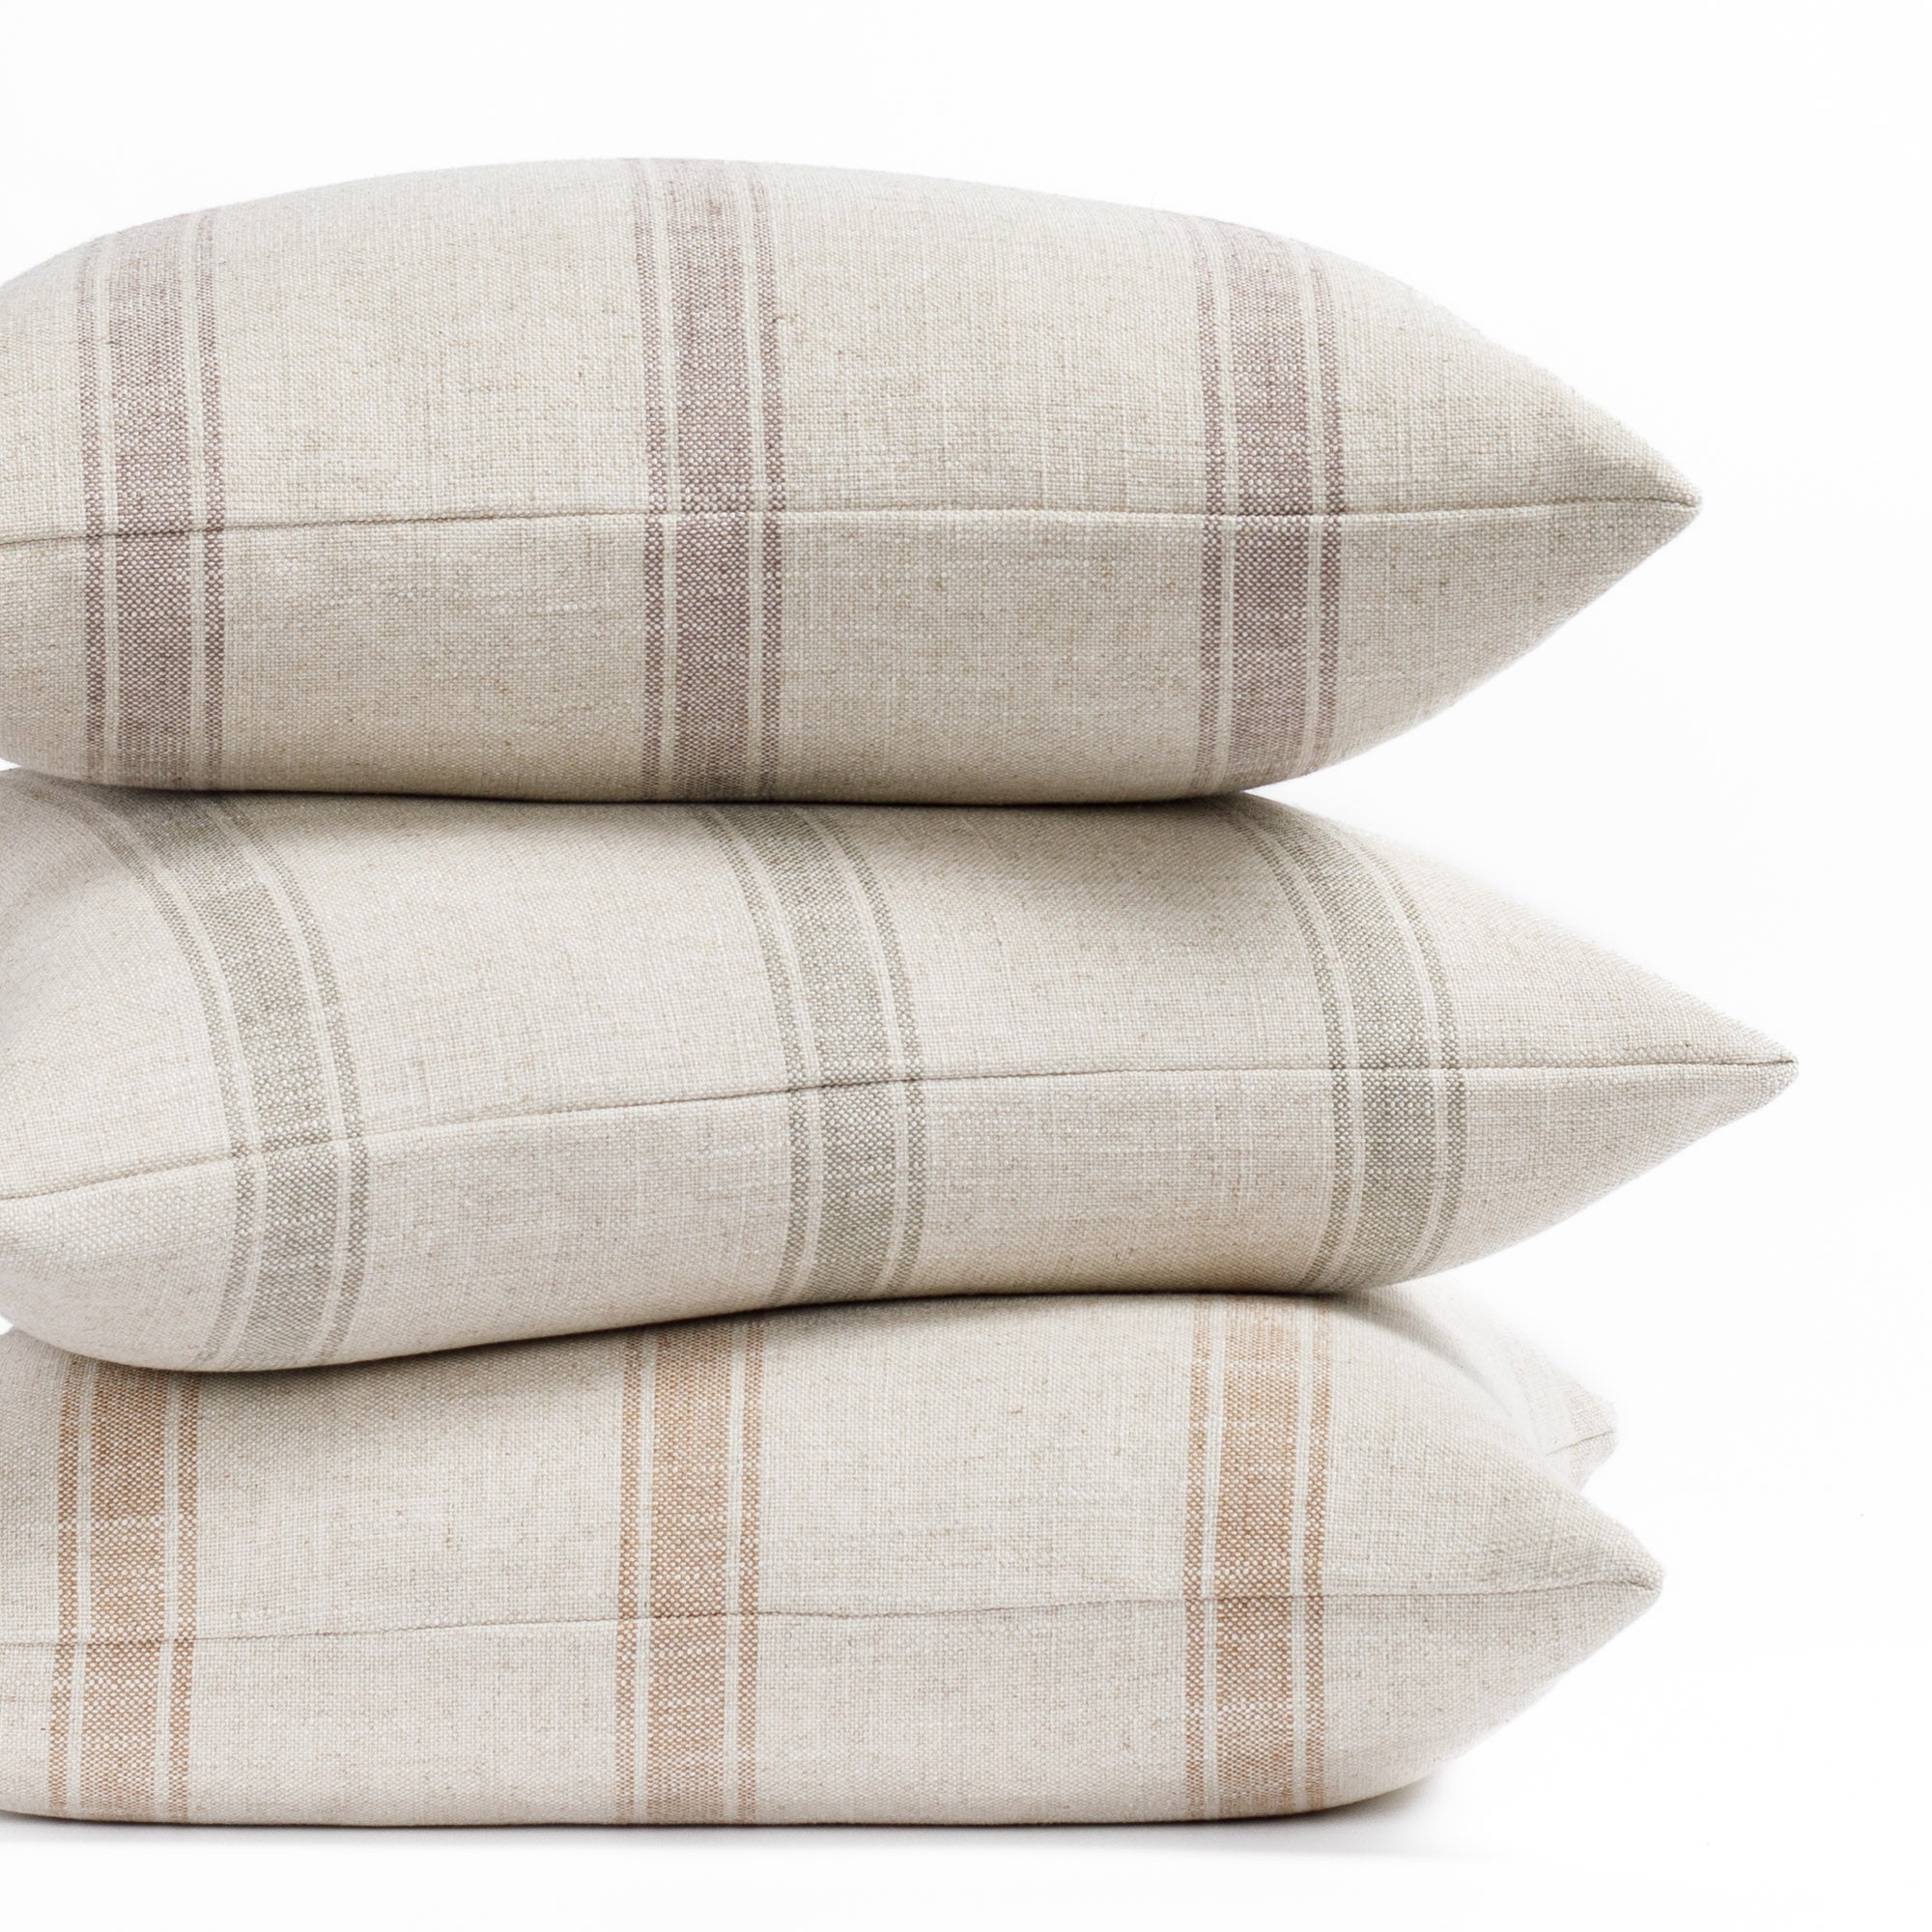 theo stripe pillows in mauve, rust and lake colourways